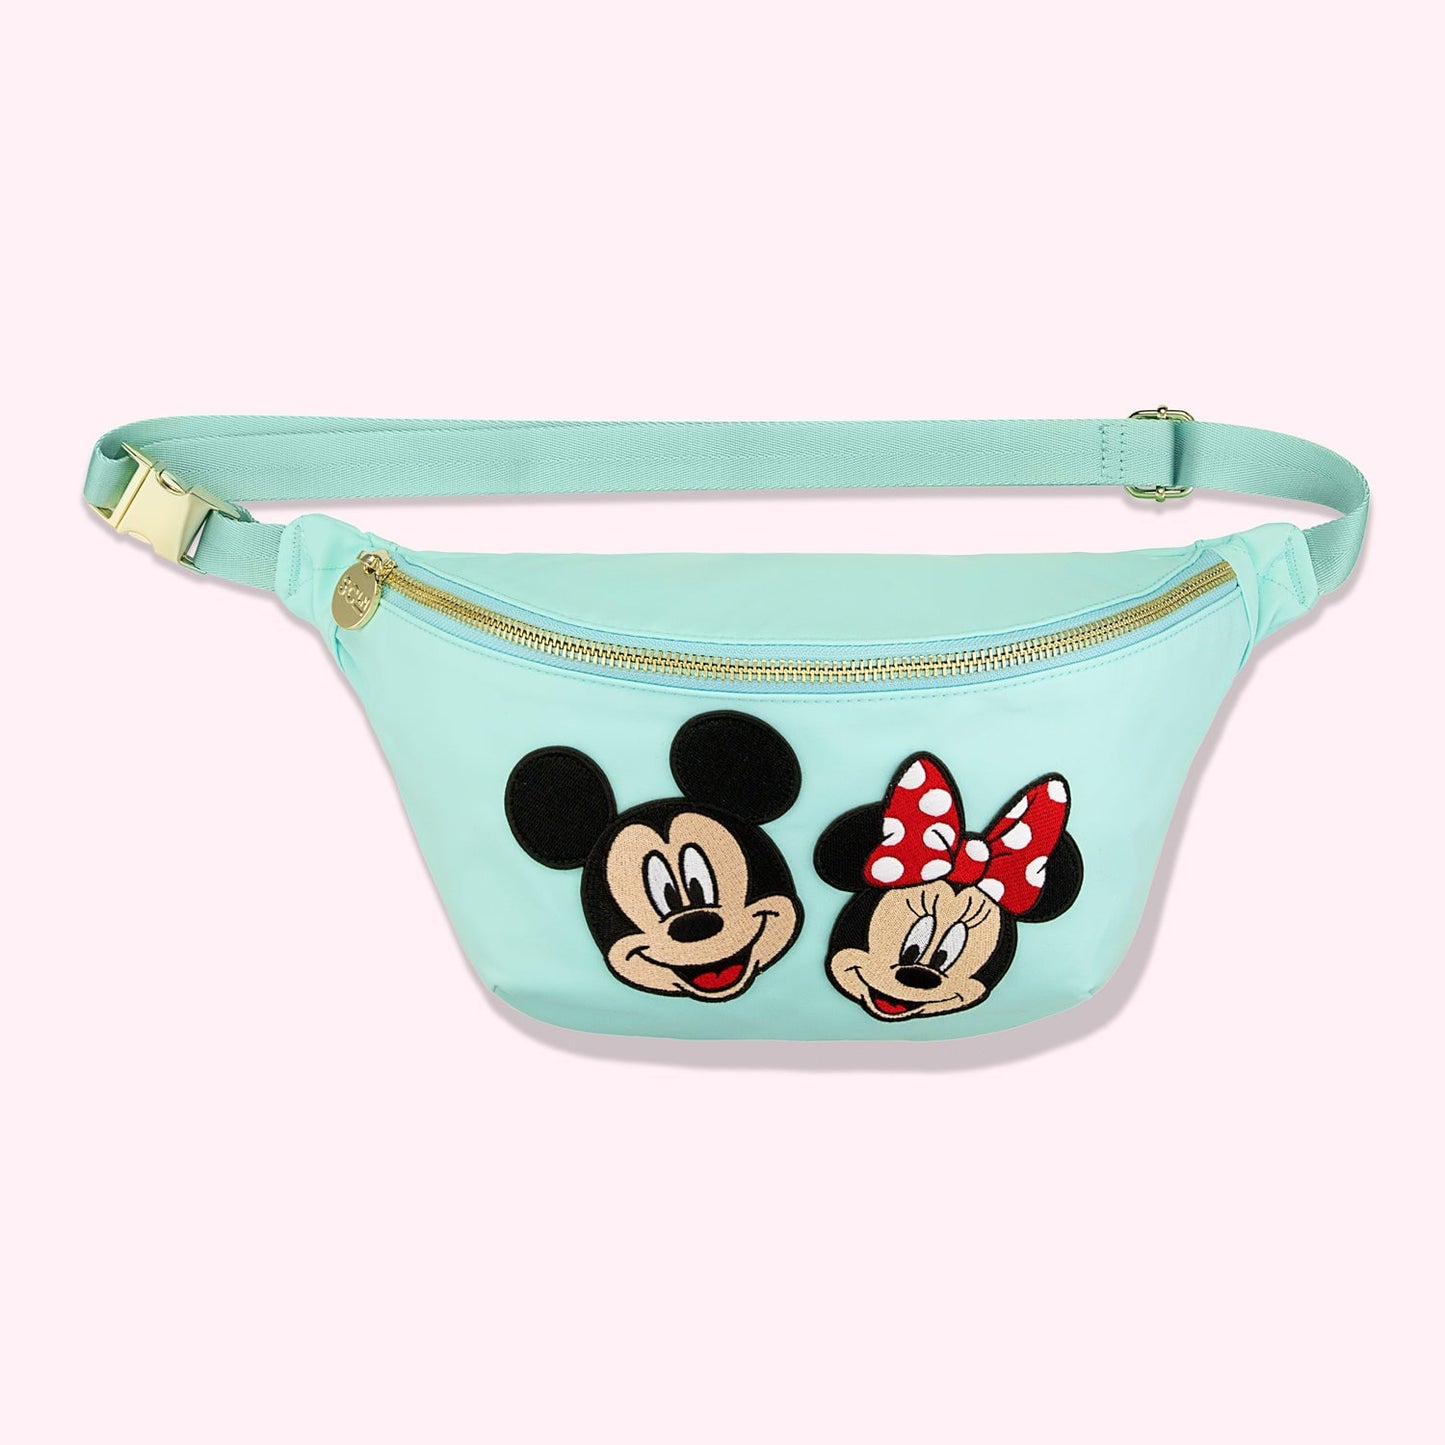 Jumbo Cotton Candy Fanny Pack with Medium Mickey & Minnie Patch